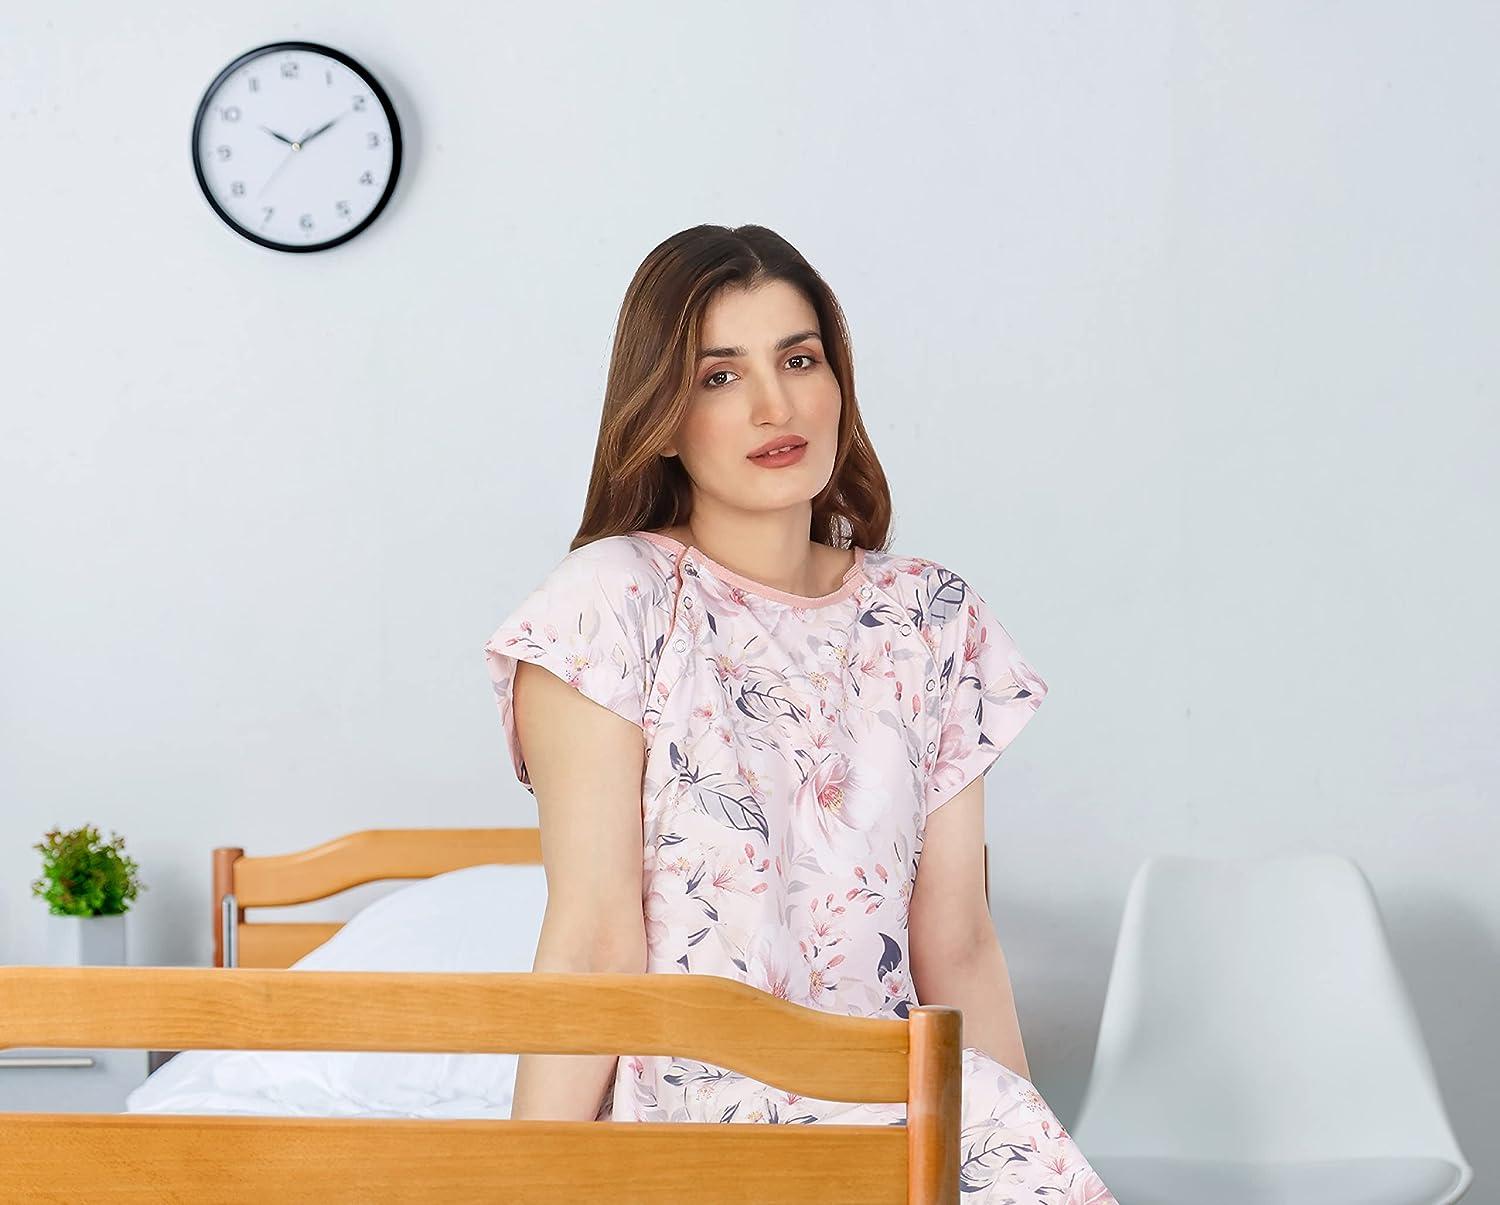 NY Threads Hospital Gown Soft and Stylish Patient Gown (Small-Medium White  Rose - Pink) Small-Medium